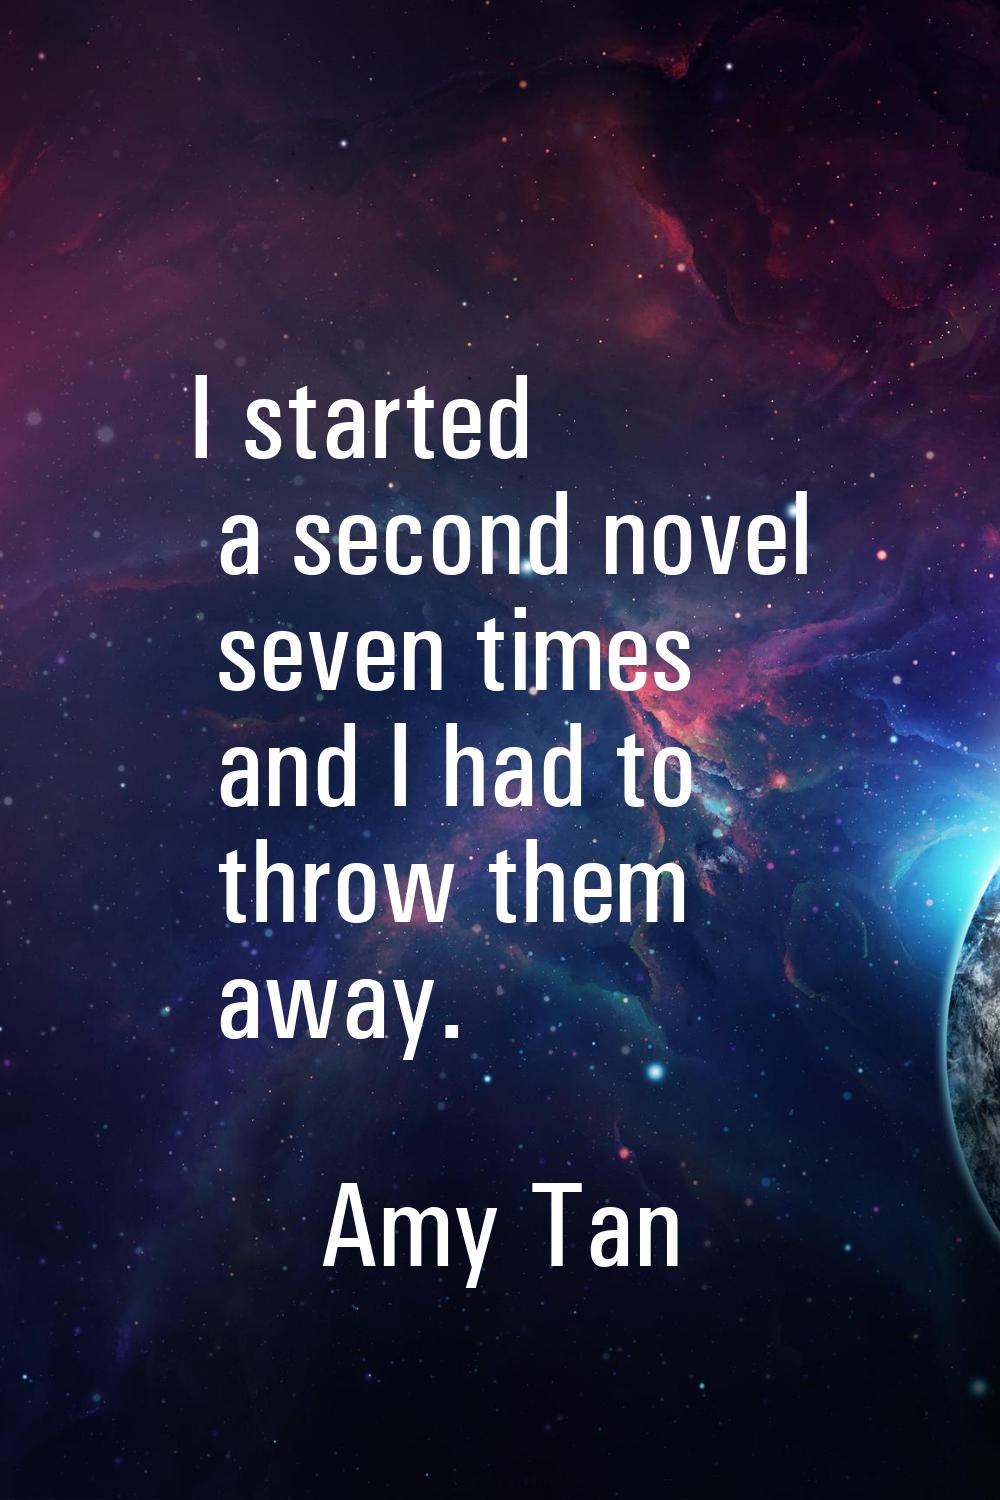 I started a second novel seven times and I had to throw them away.